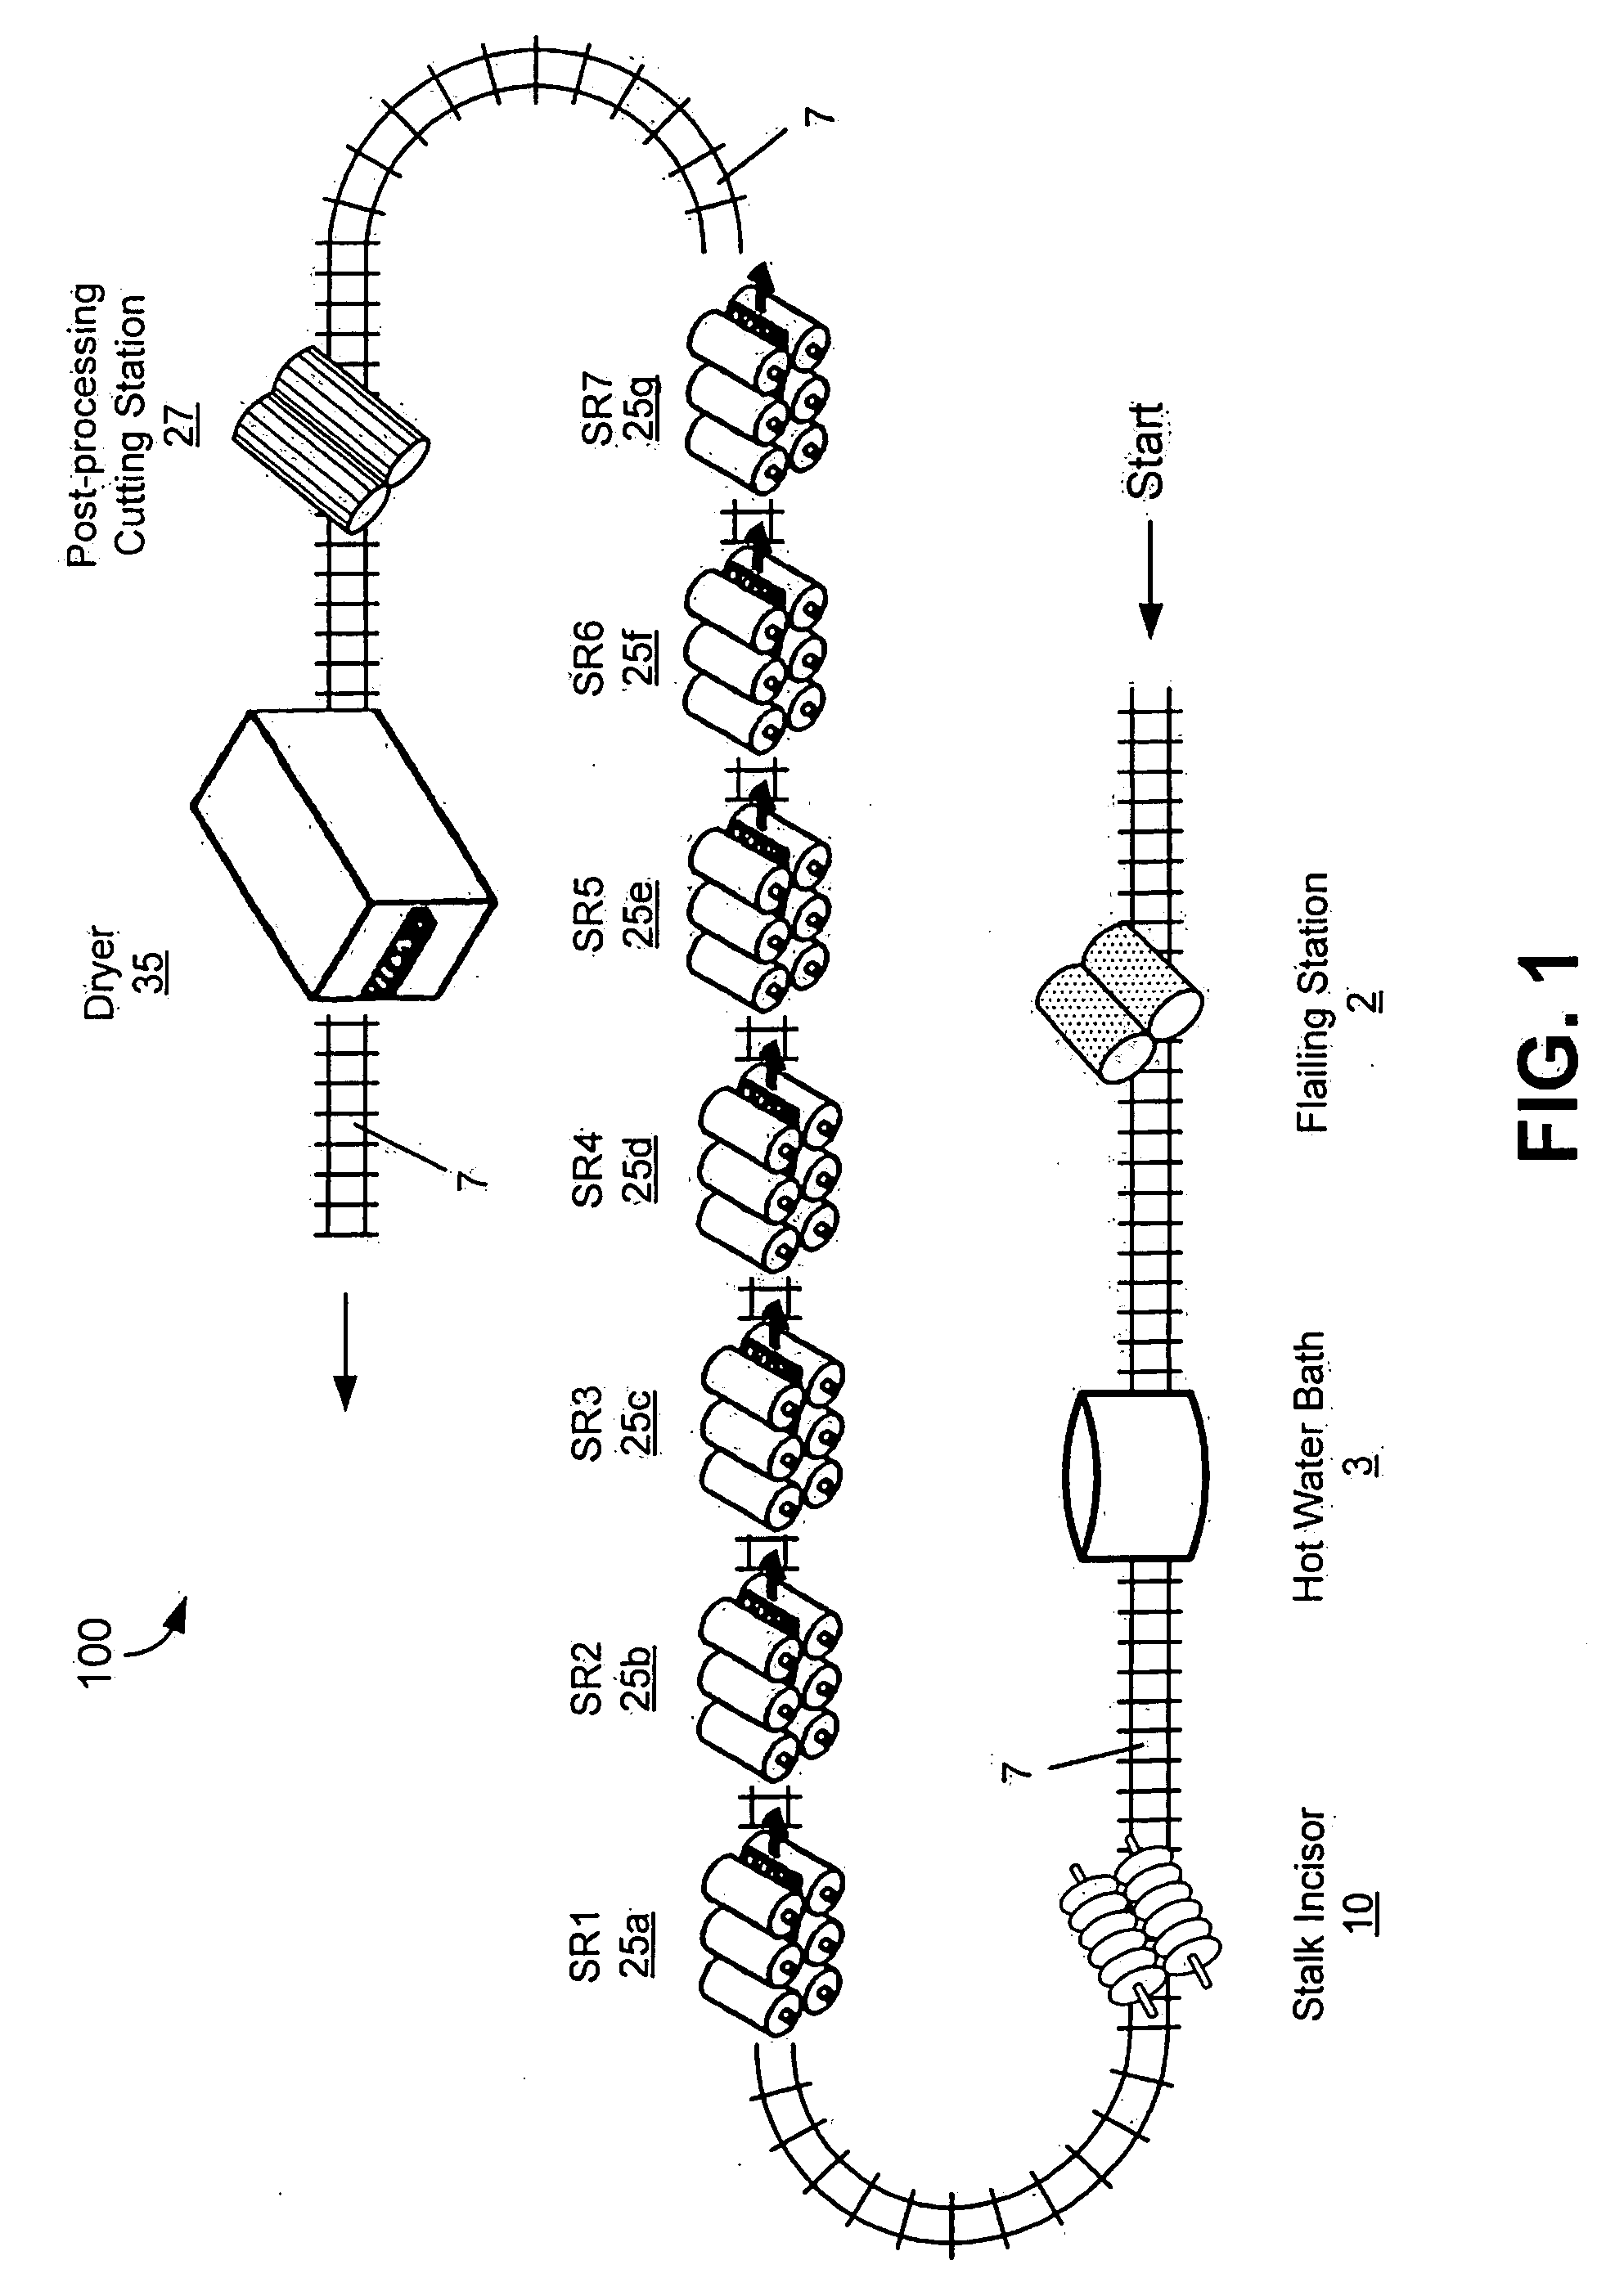 System and method for the separation of bast fibers